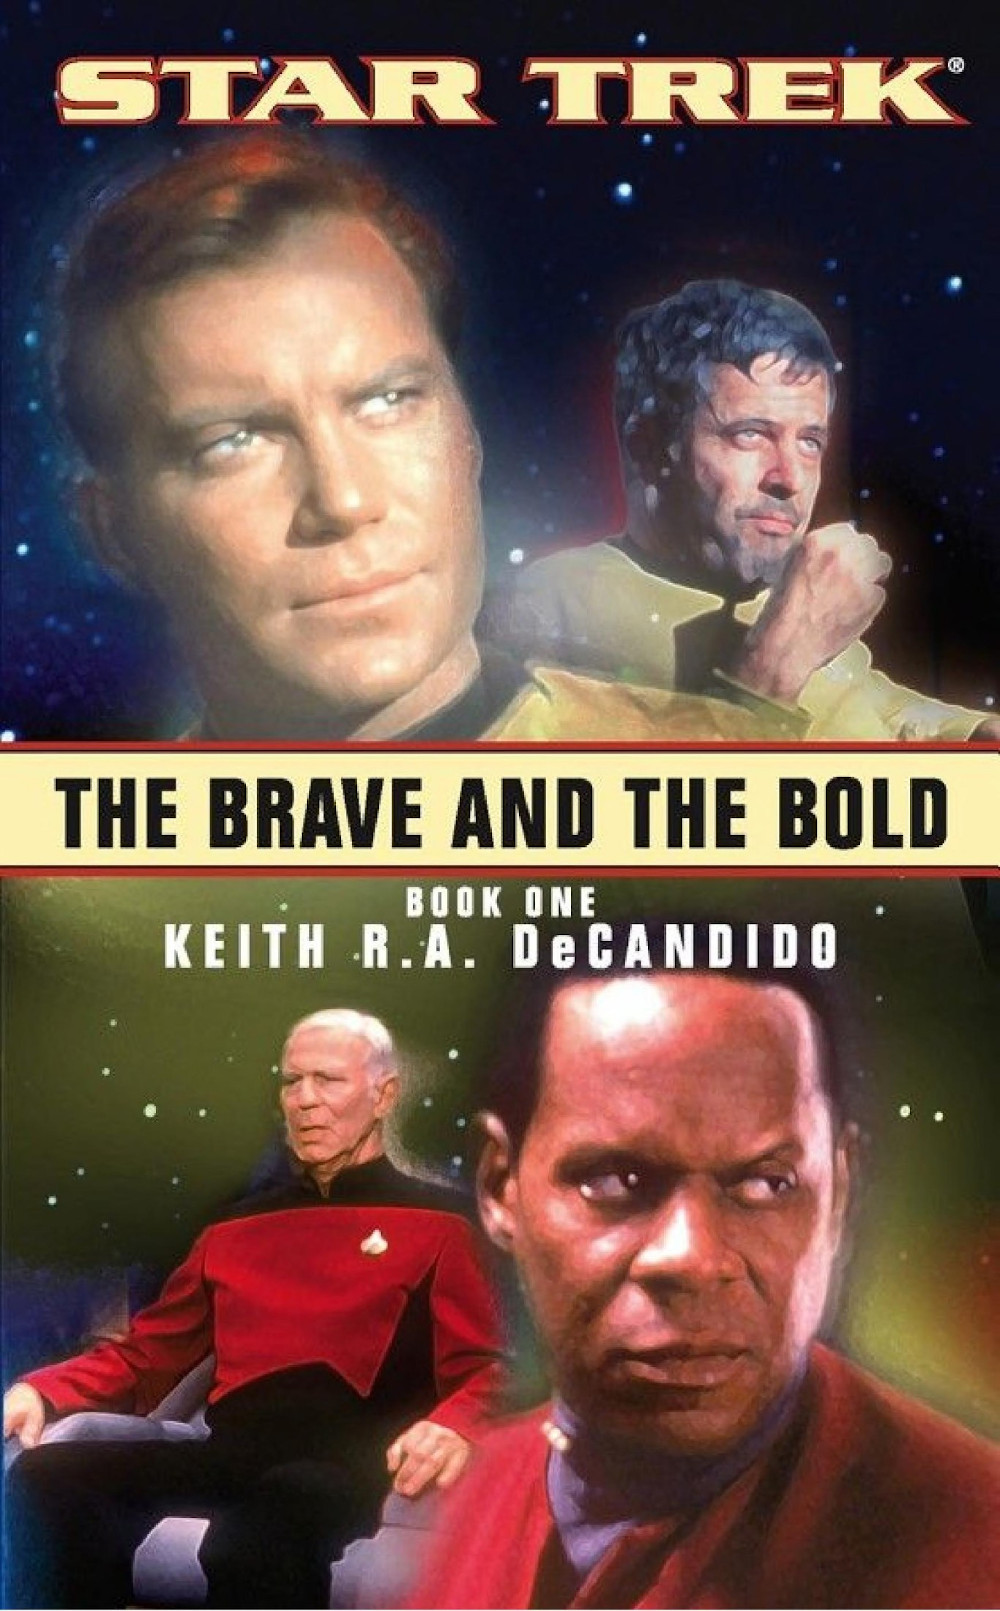 The Brave and the Bold, Book One (Nov 2002)